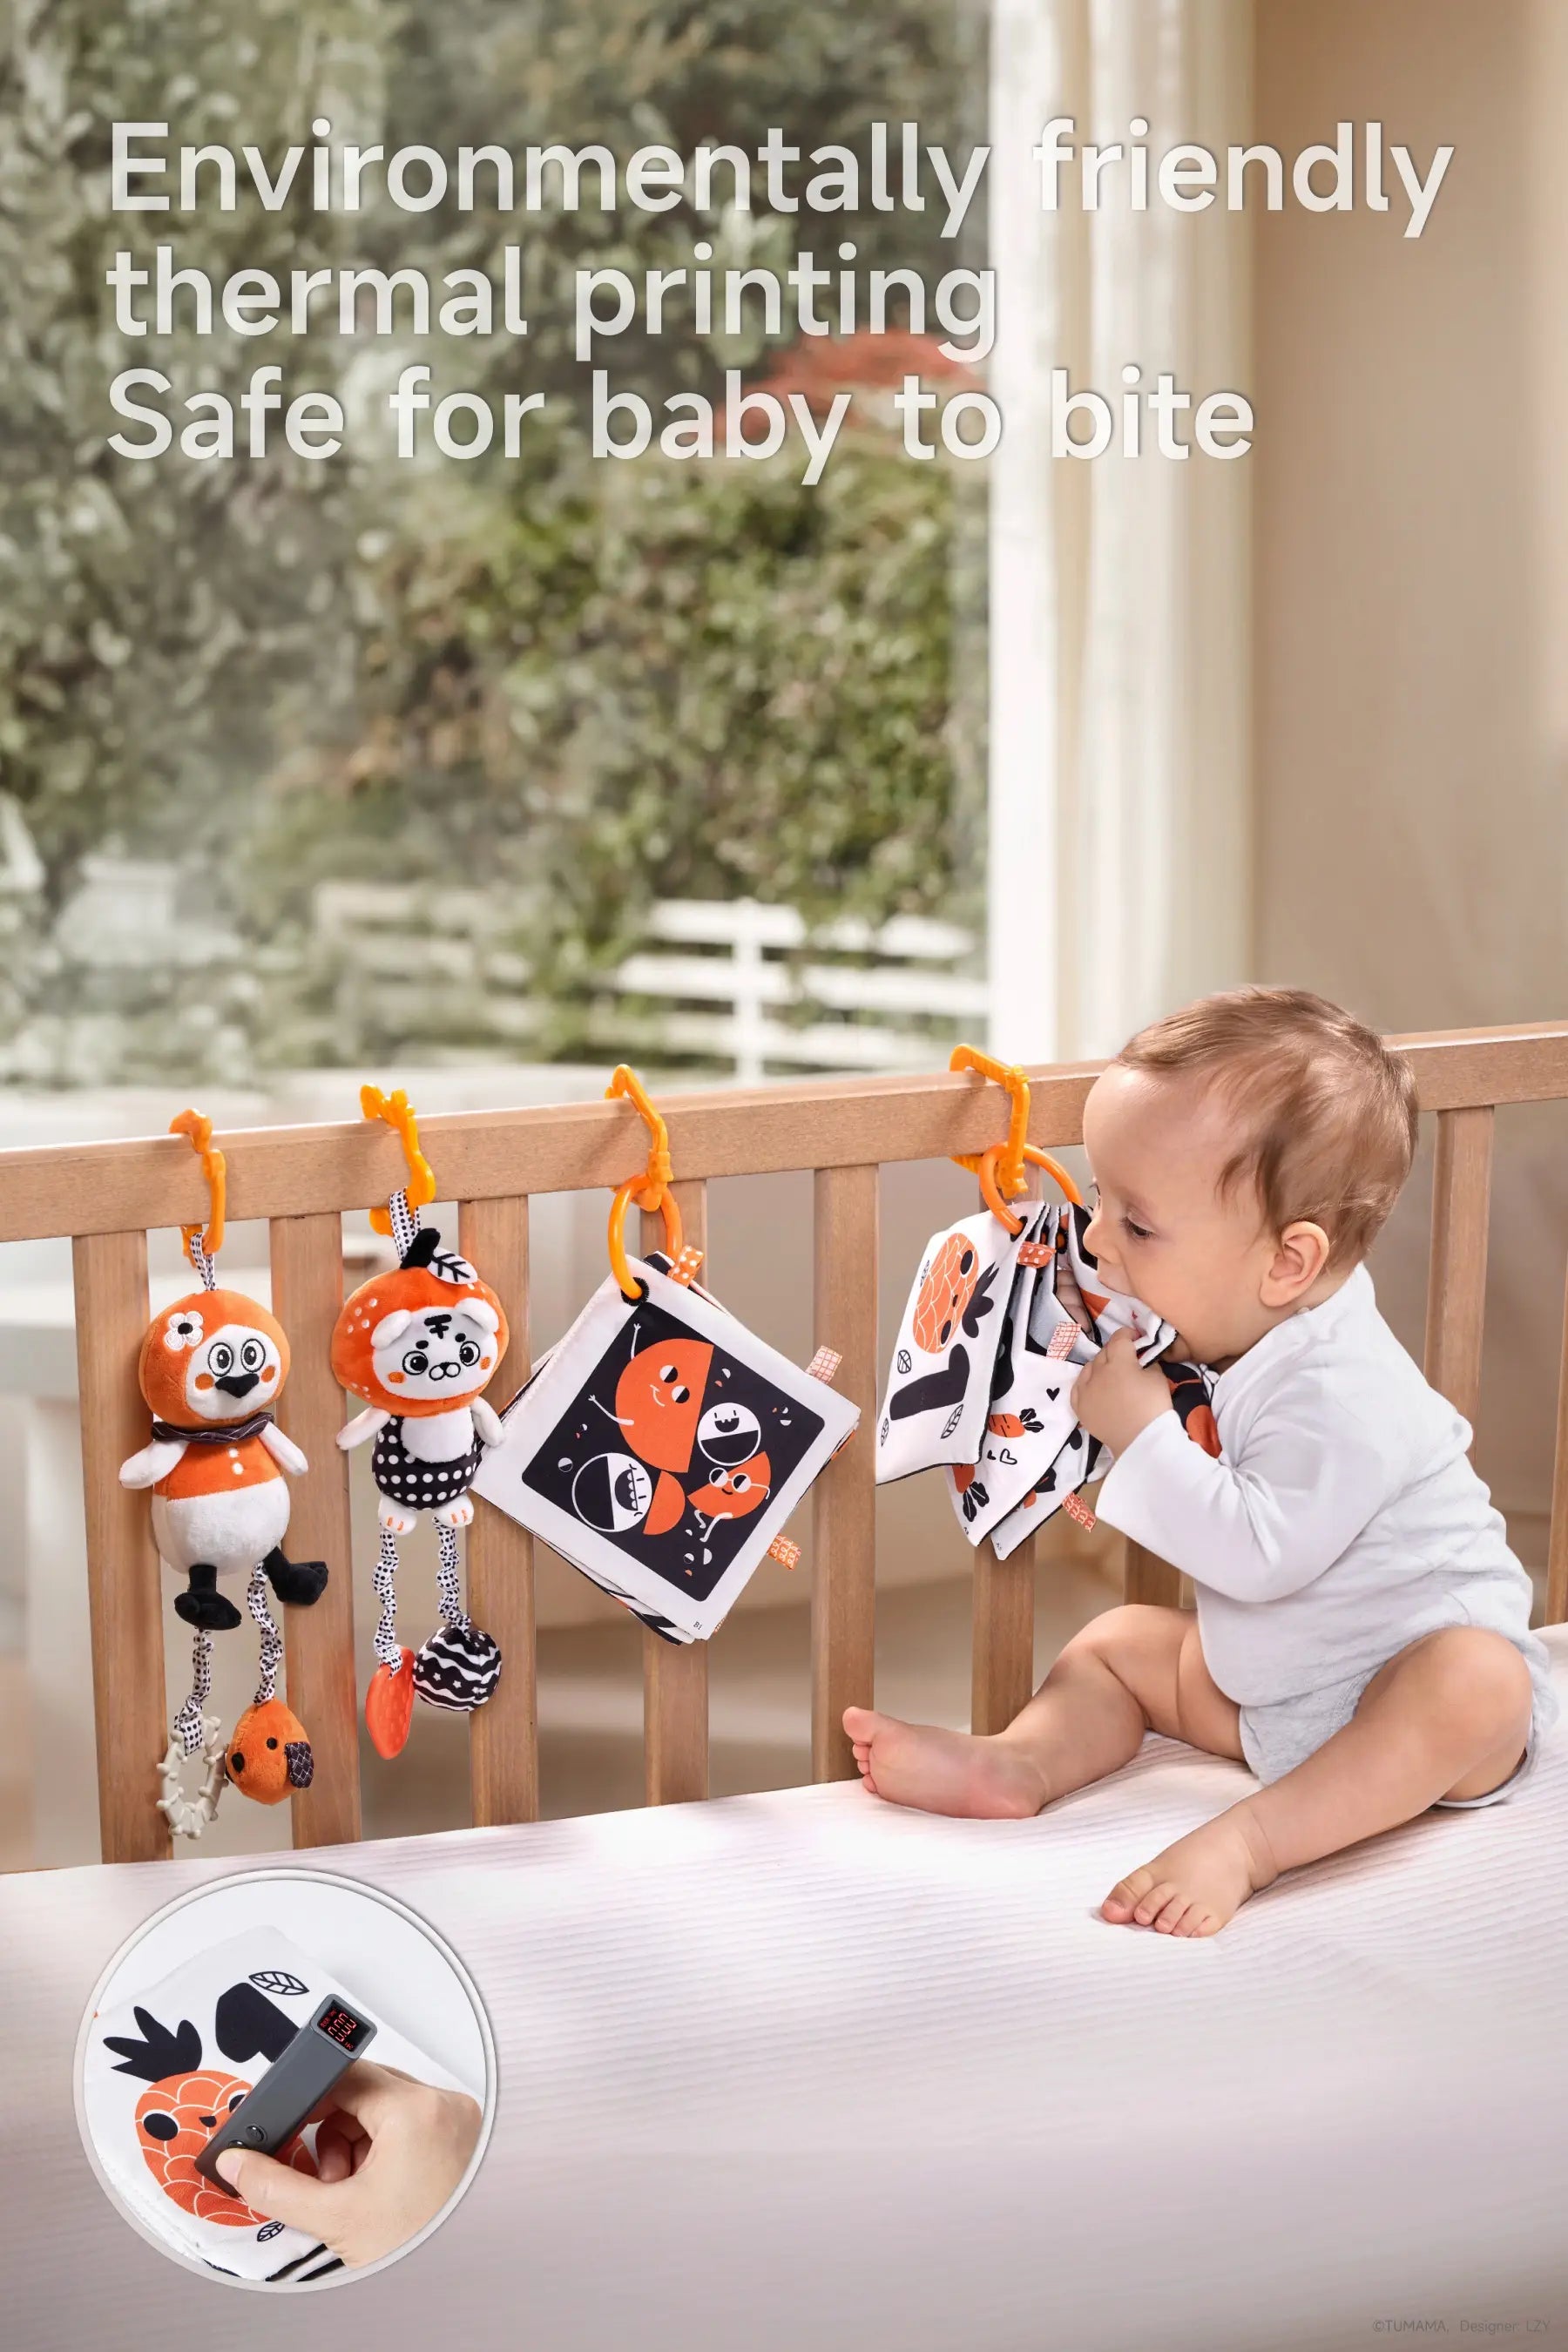 Crib car seat and stroller entertainment with hanging toy